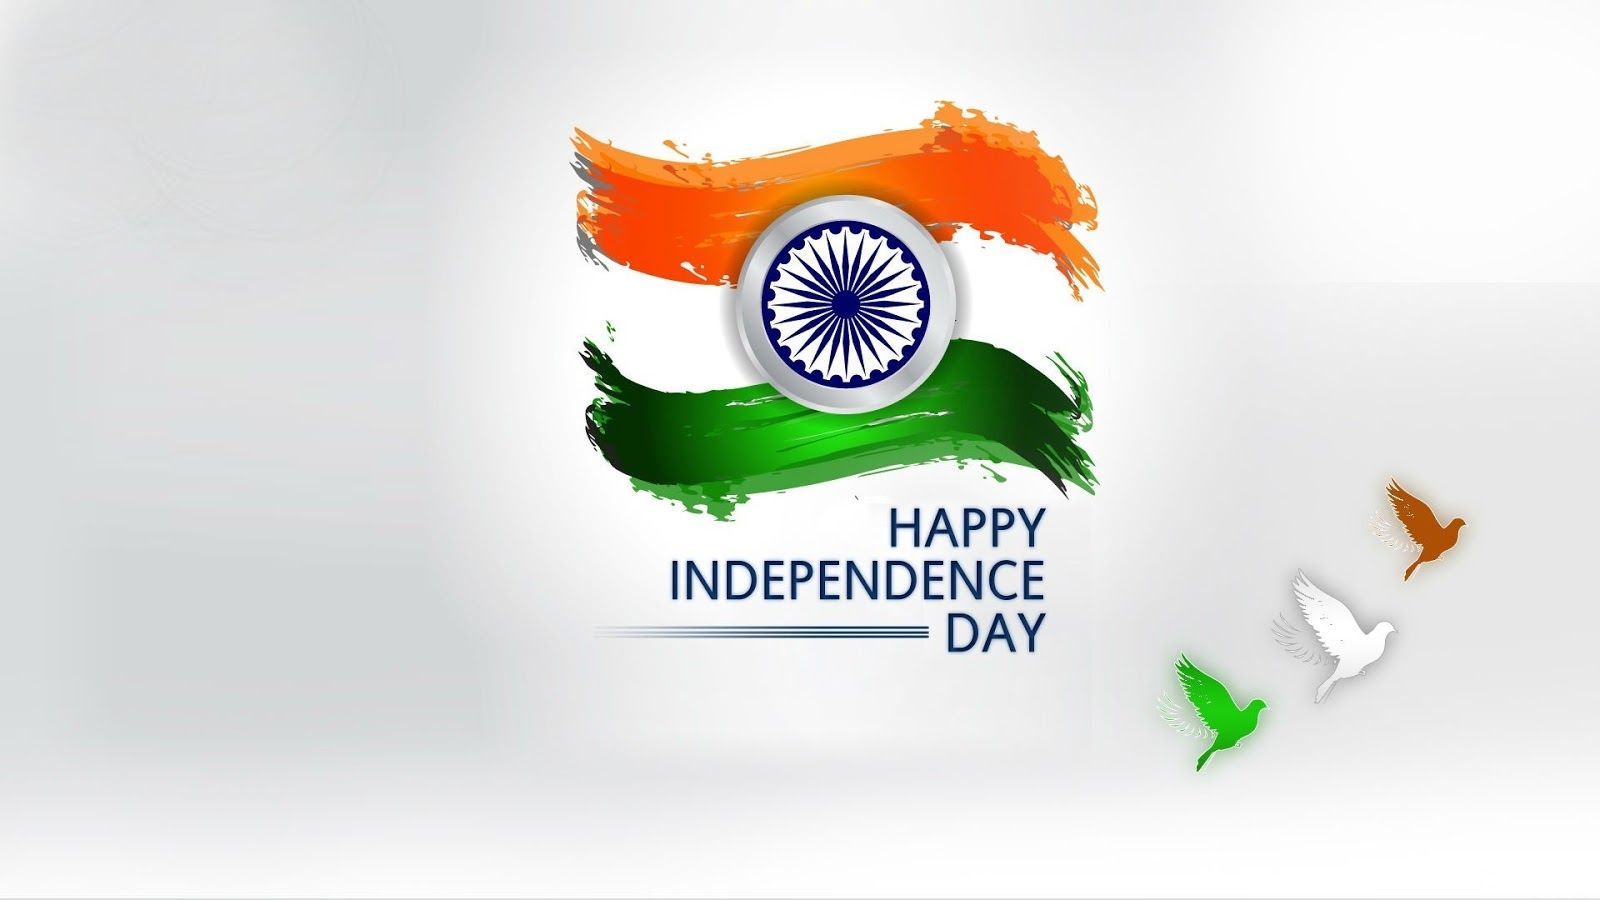 Happy independence day hd wallpapers images photos wallpapers lap happy independence day wallpaper happy independence day wishes independence day wishes